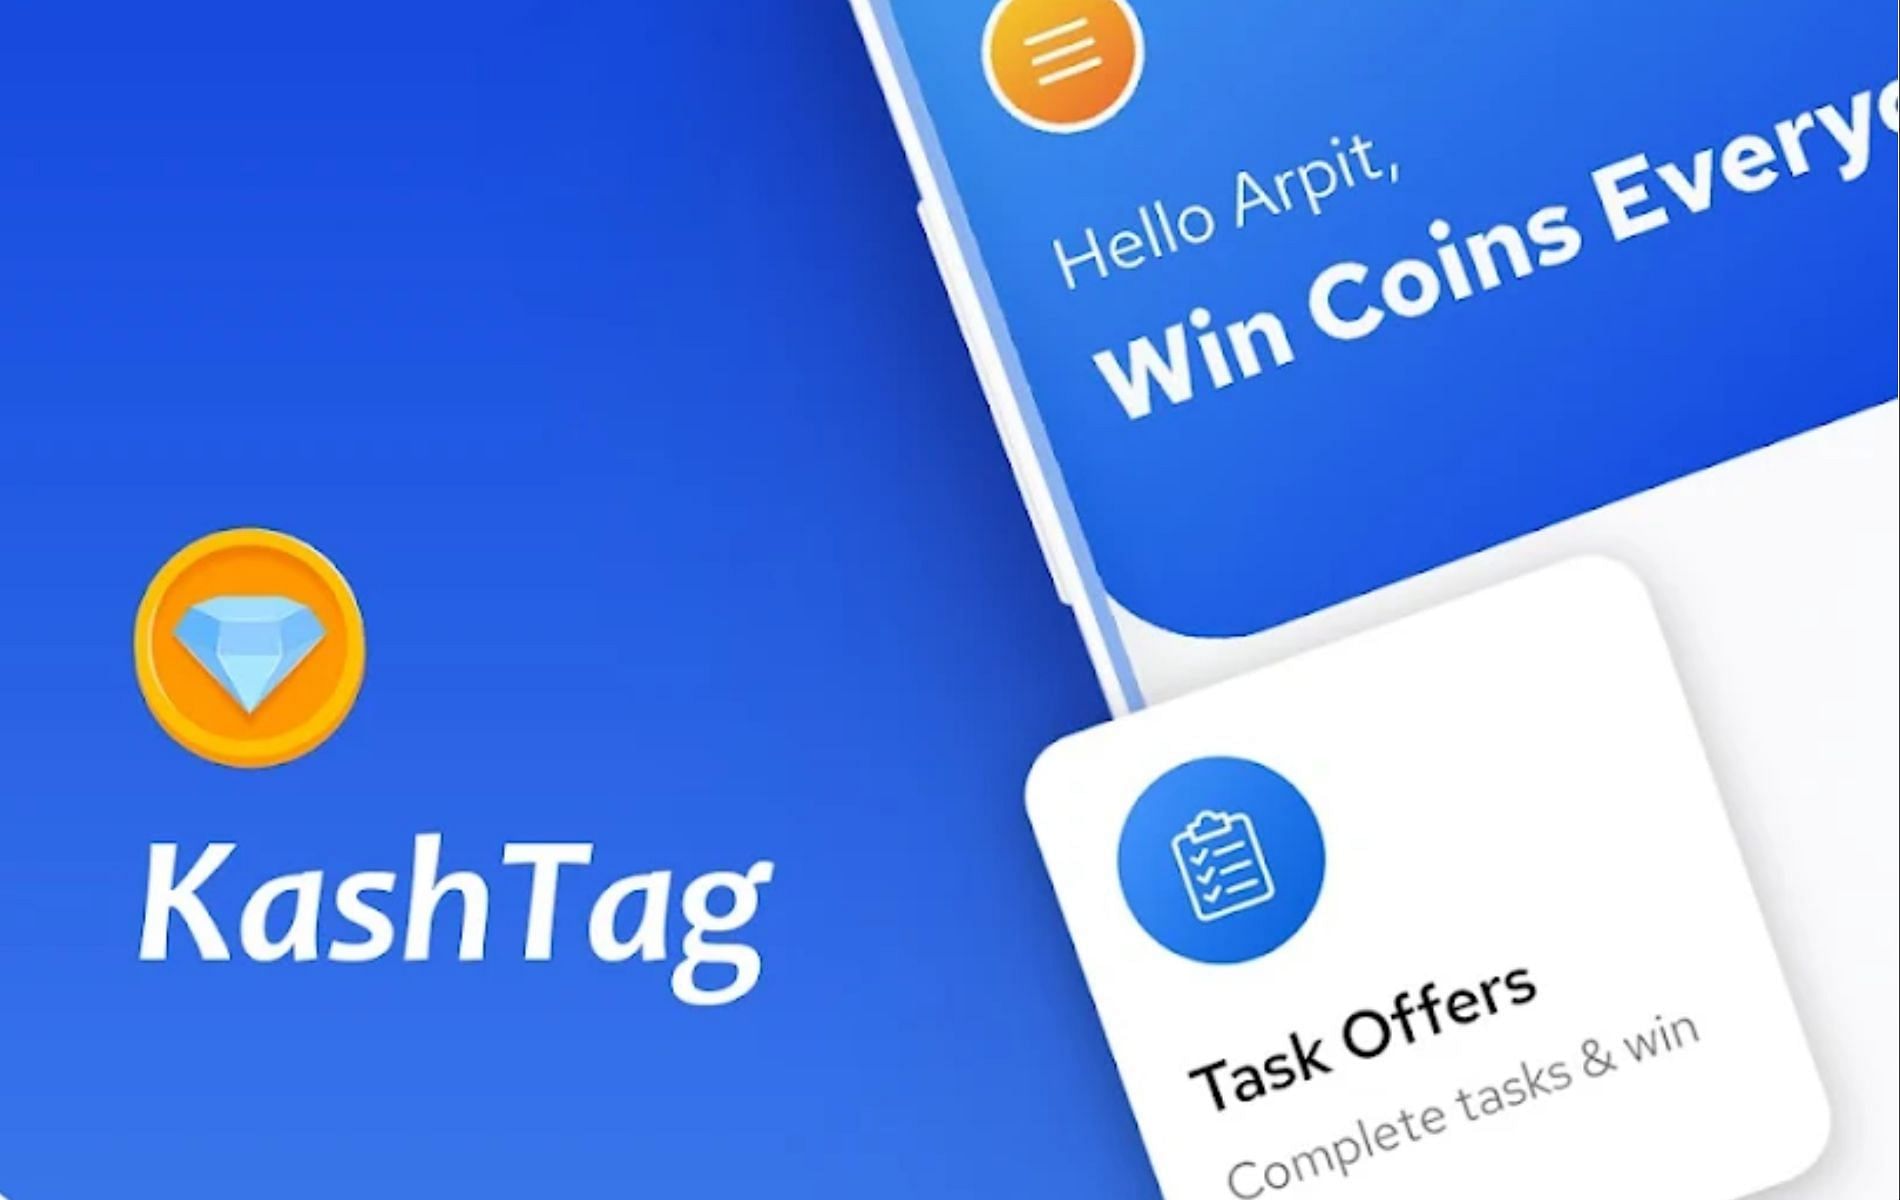 Kash Tag has a dedicated section that offers Free Fire diamonds (Image via Google Play Store)